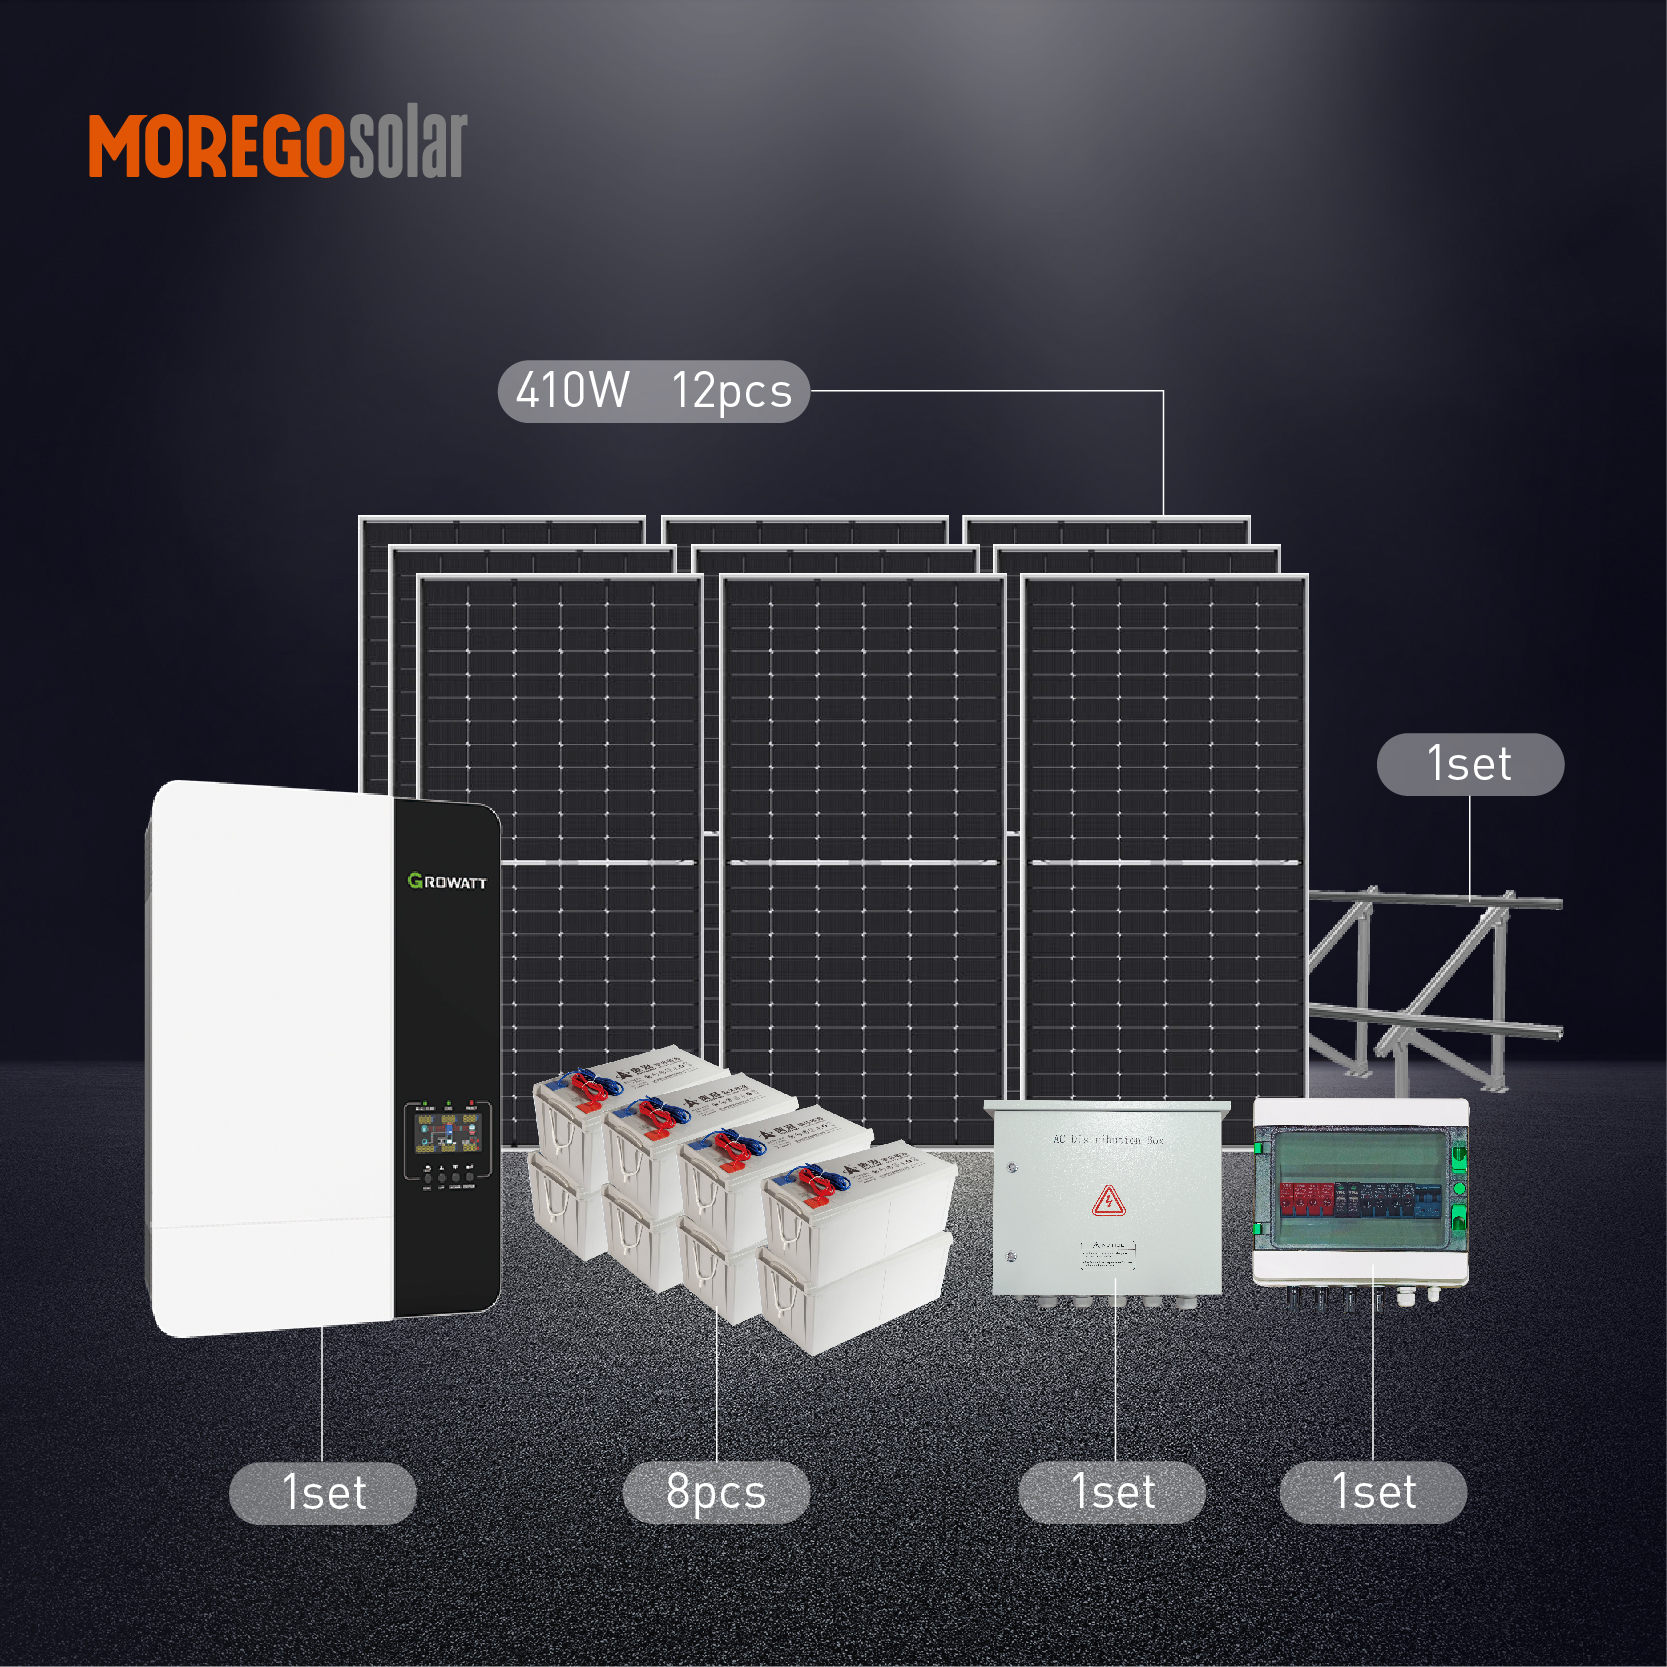 Moregosolar Solar Energy System 5kw Off Grid PV System 5000W Complete with Battery